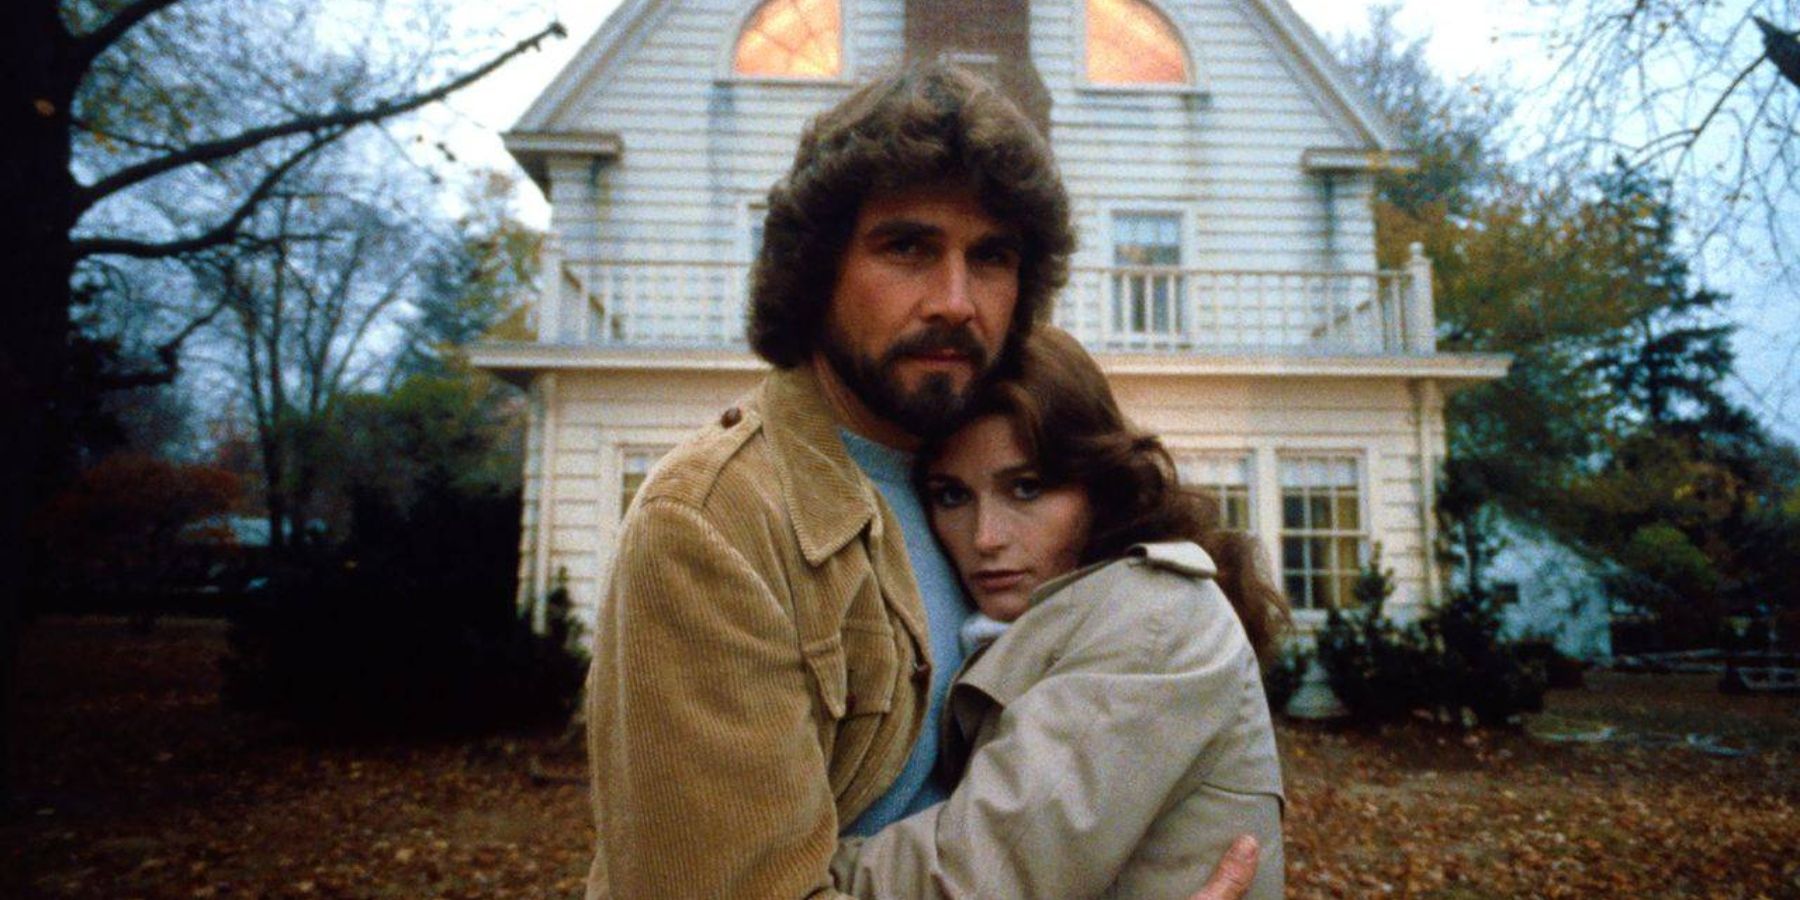 George (James Brolin) and Kathy Lutz (Margot Kidder) in front of the house in The Amityville Horror